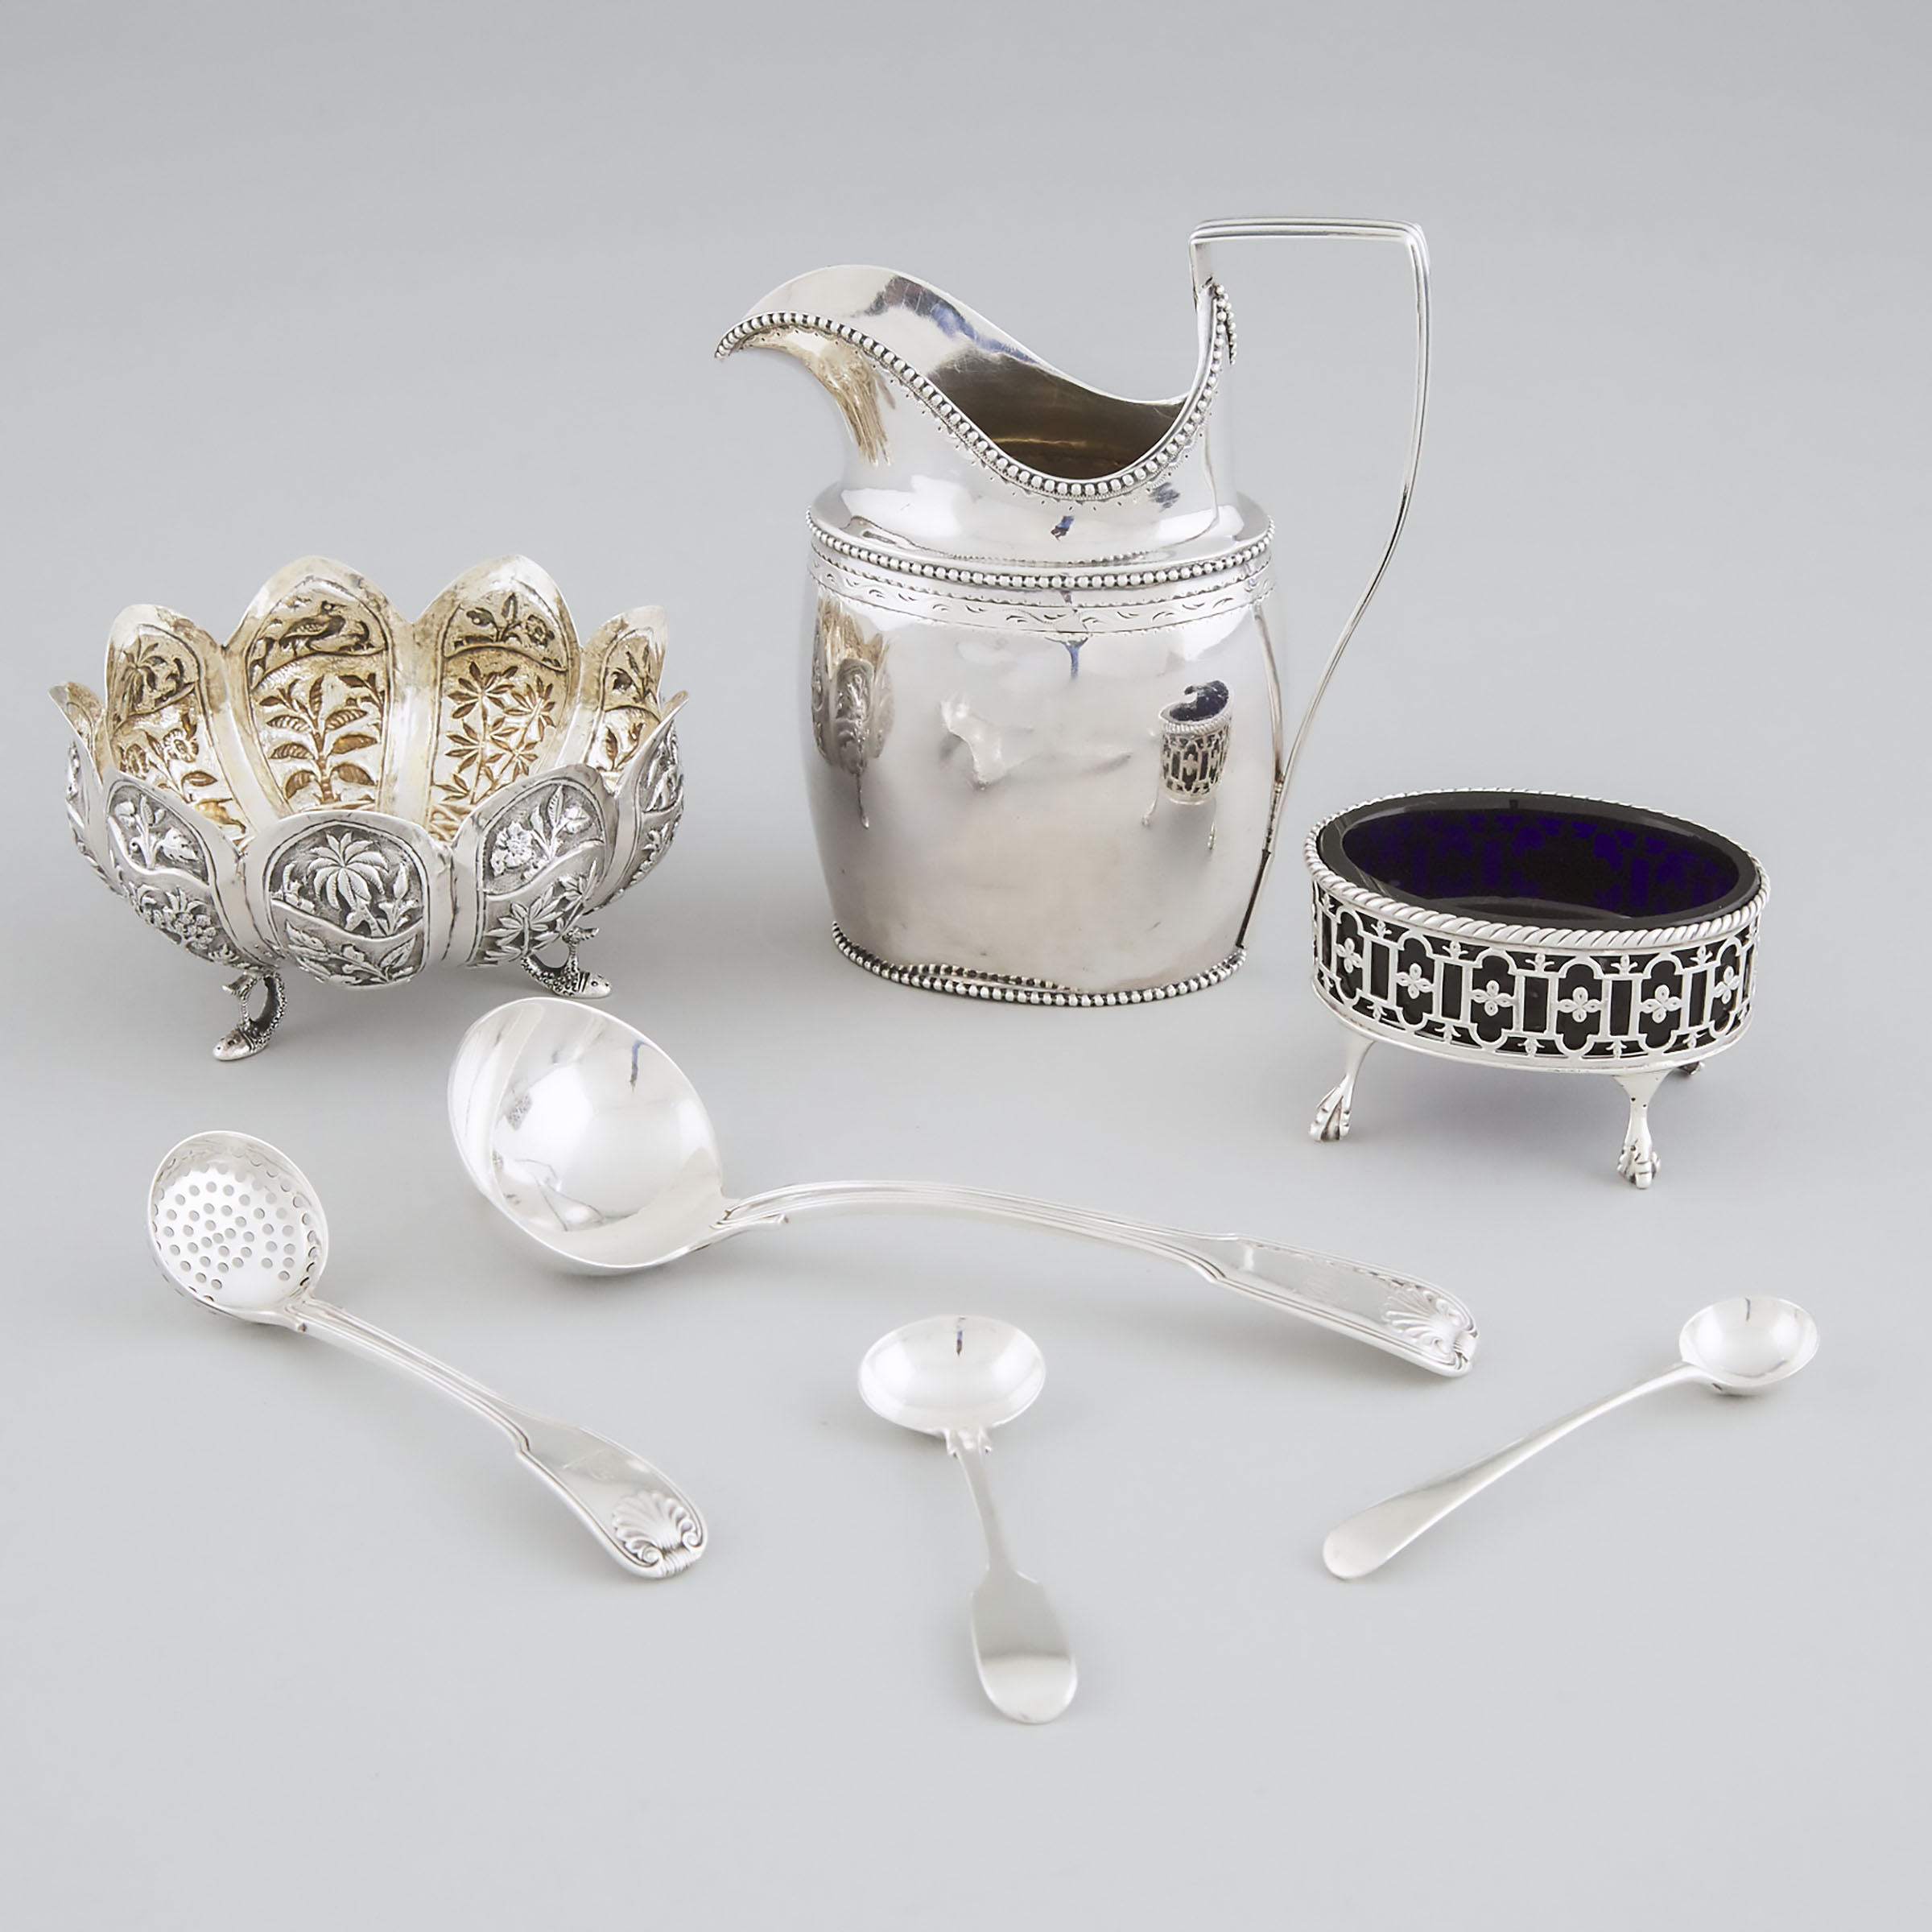 Group of English, Dutch, and Eastern Silver, 18th/19th century